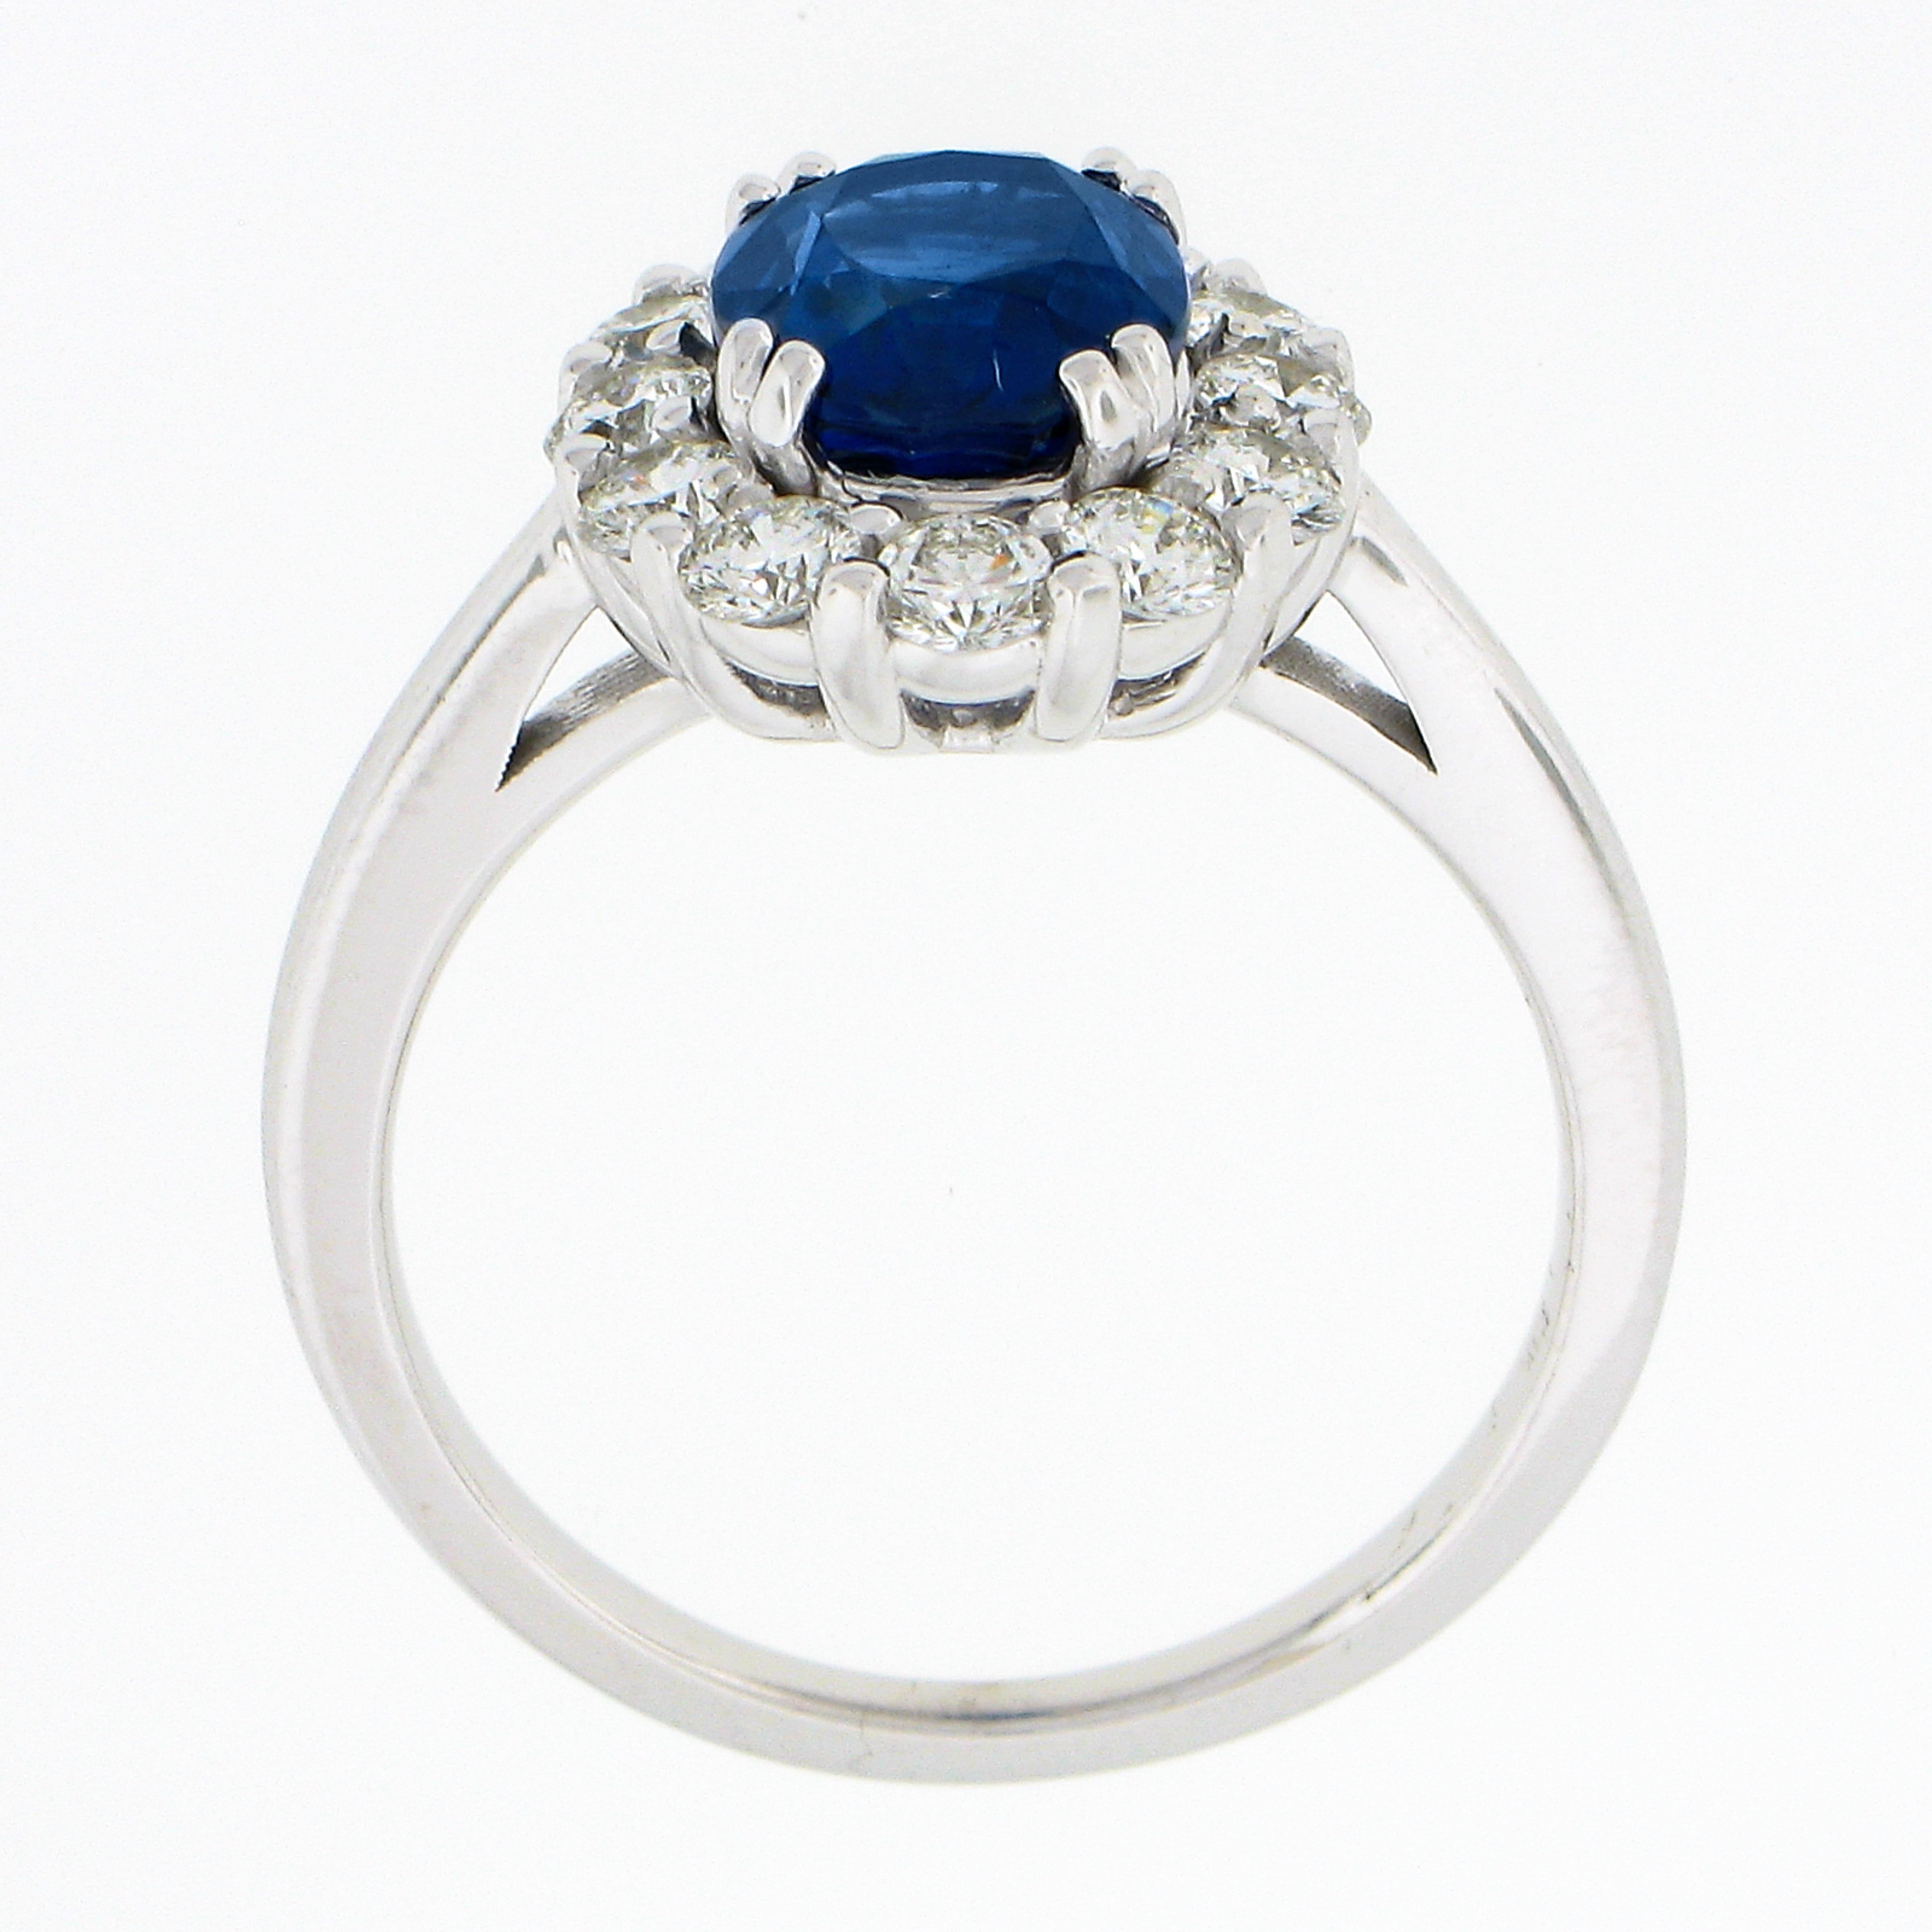 New 18k White Gold 3.39ctw SSEF Oval Sapphire & Diamond Halo Engagement Ring For Sale 3